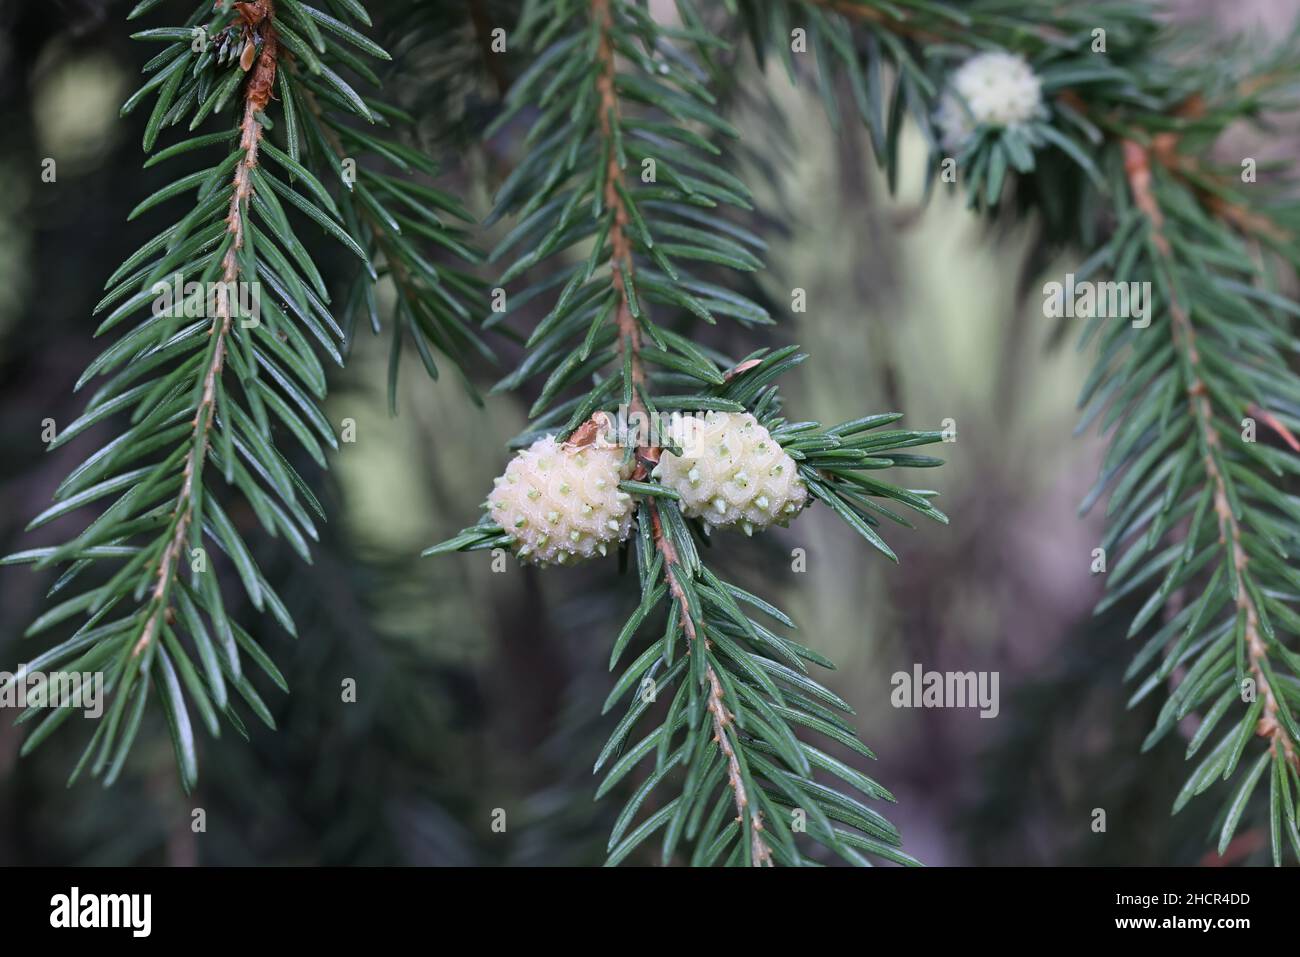 Adelges laricis, known as pale spruce gall adelgid, a plant parasite forming galls on European spruce, Picea abies Stock Photo